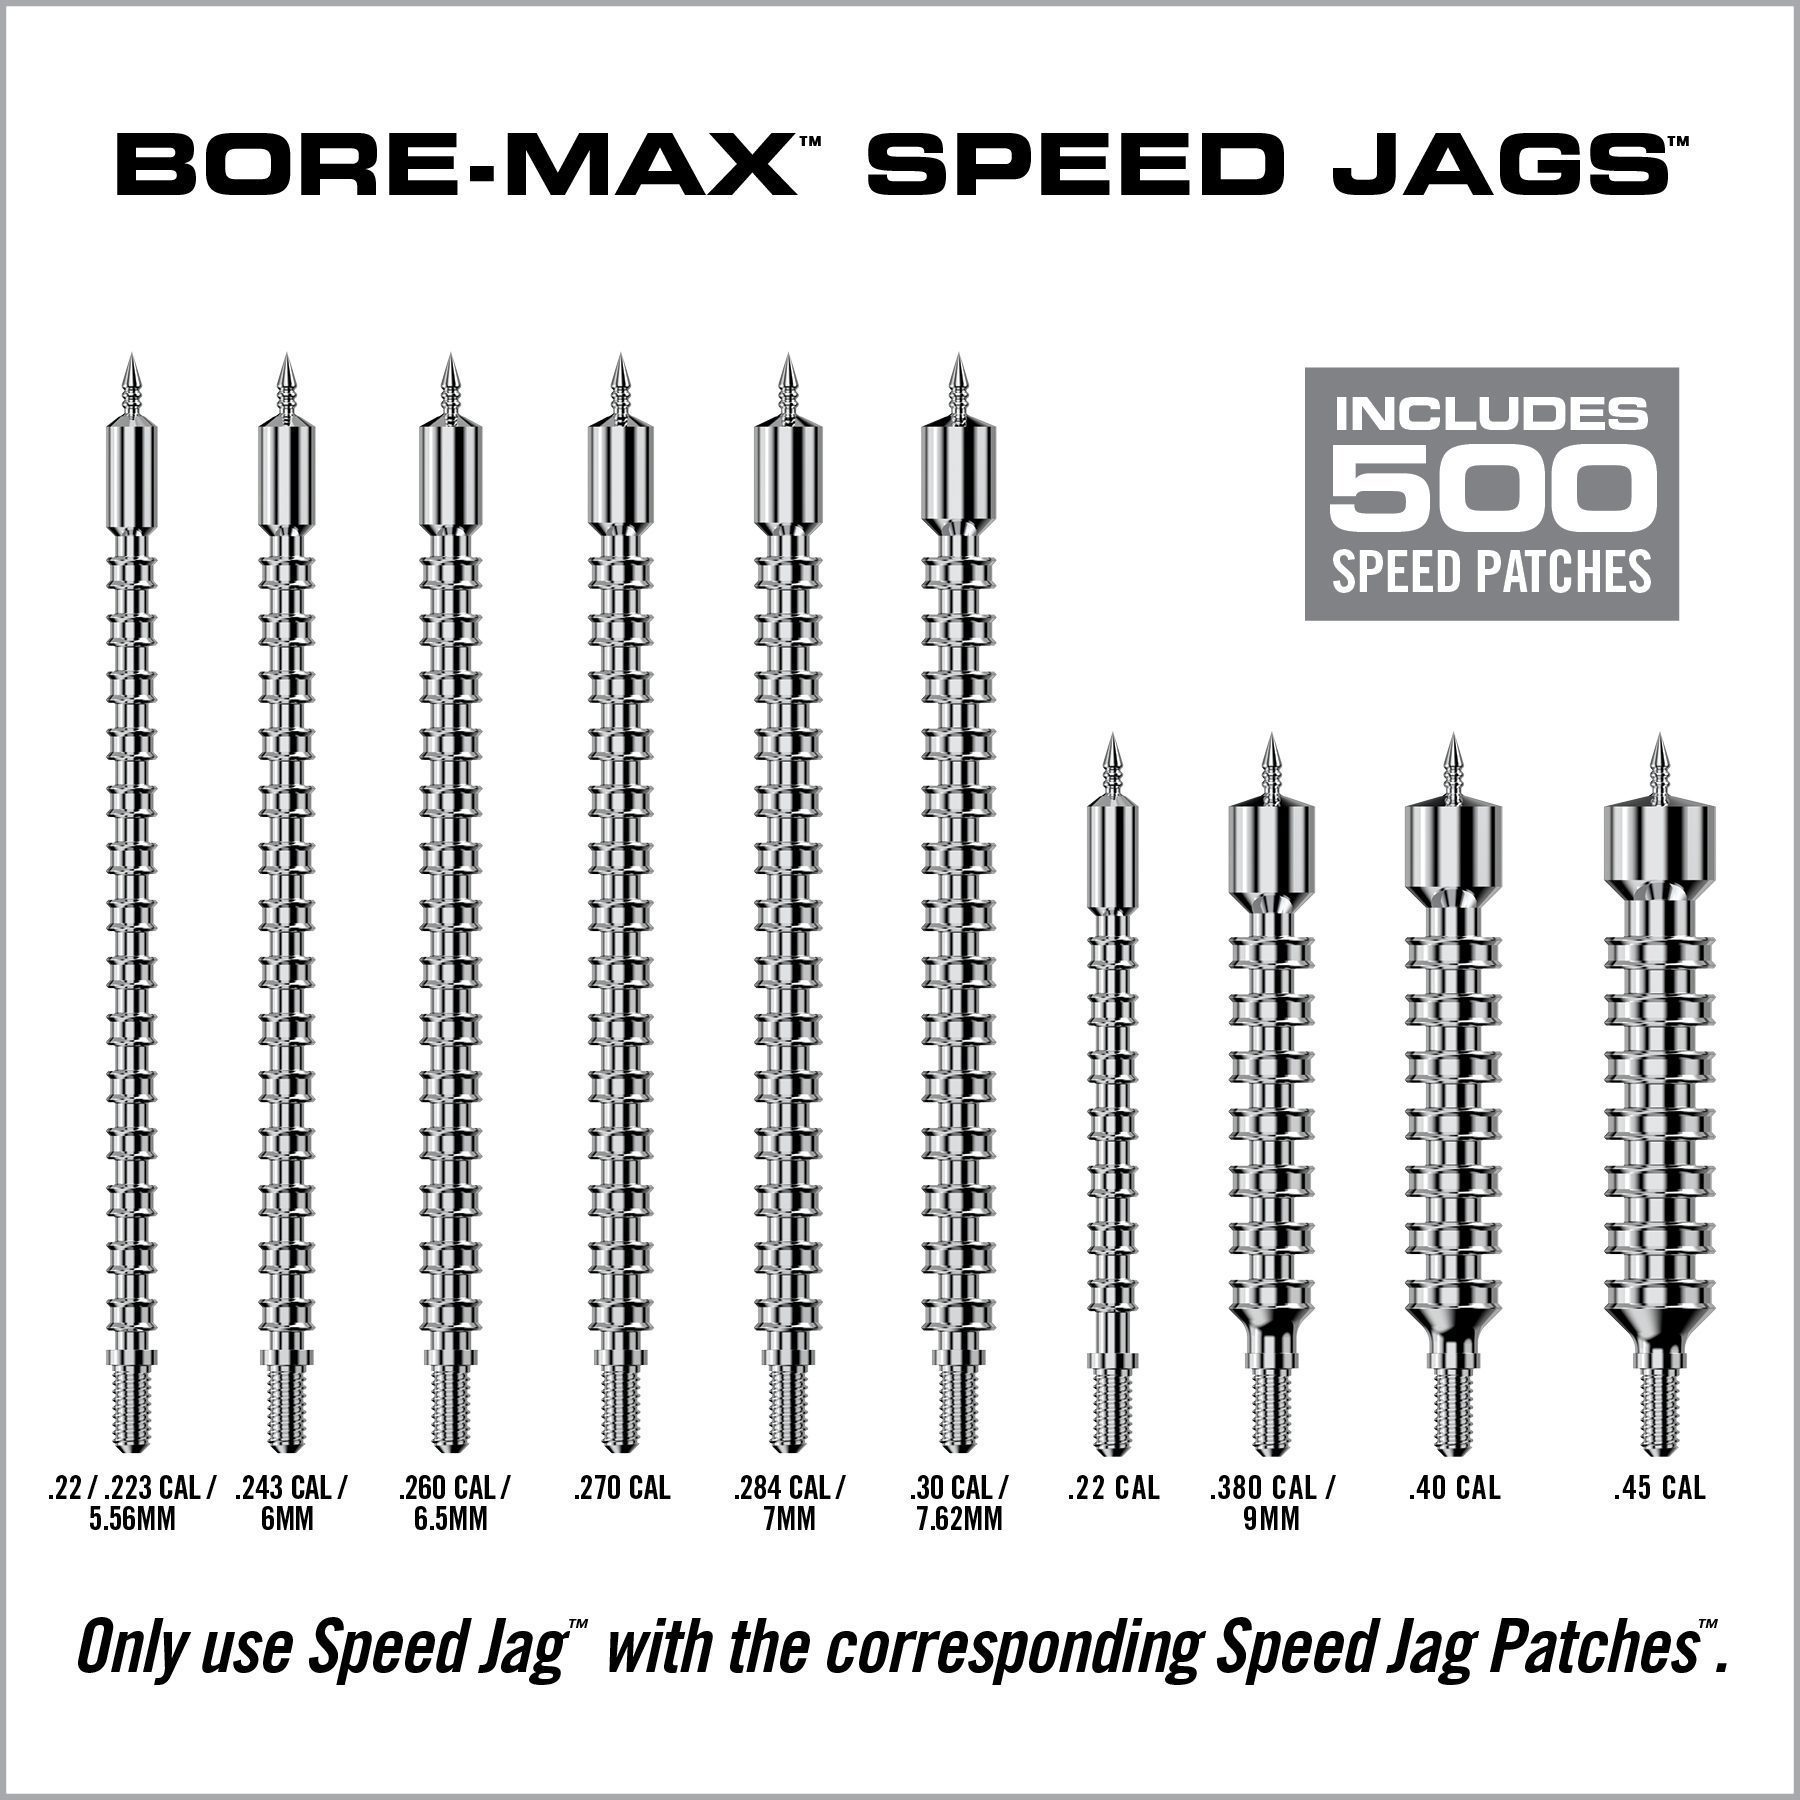 the size and type of bore - max speed jags